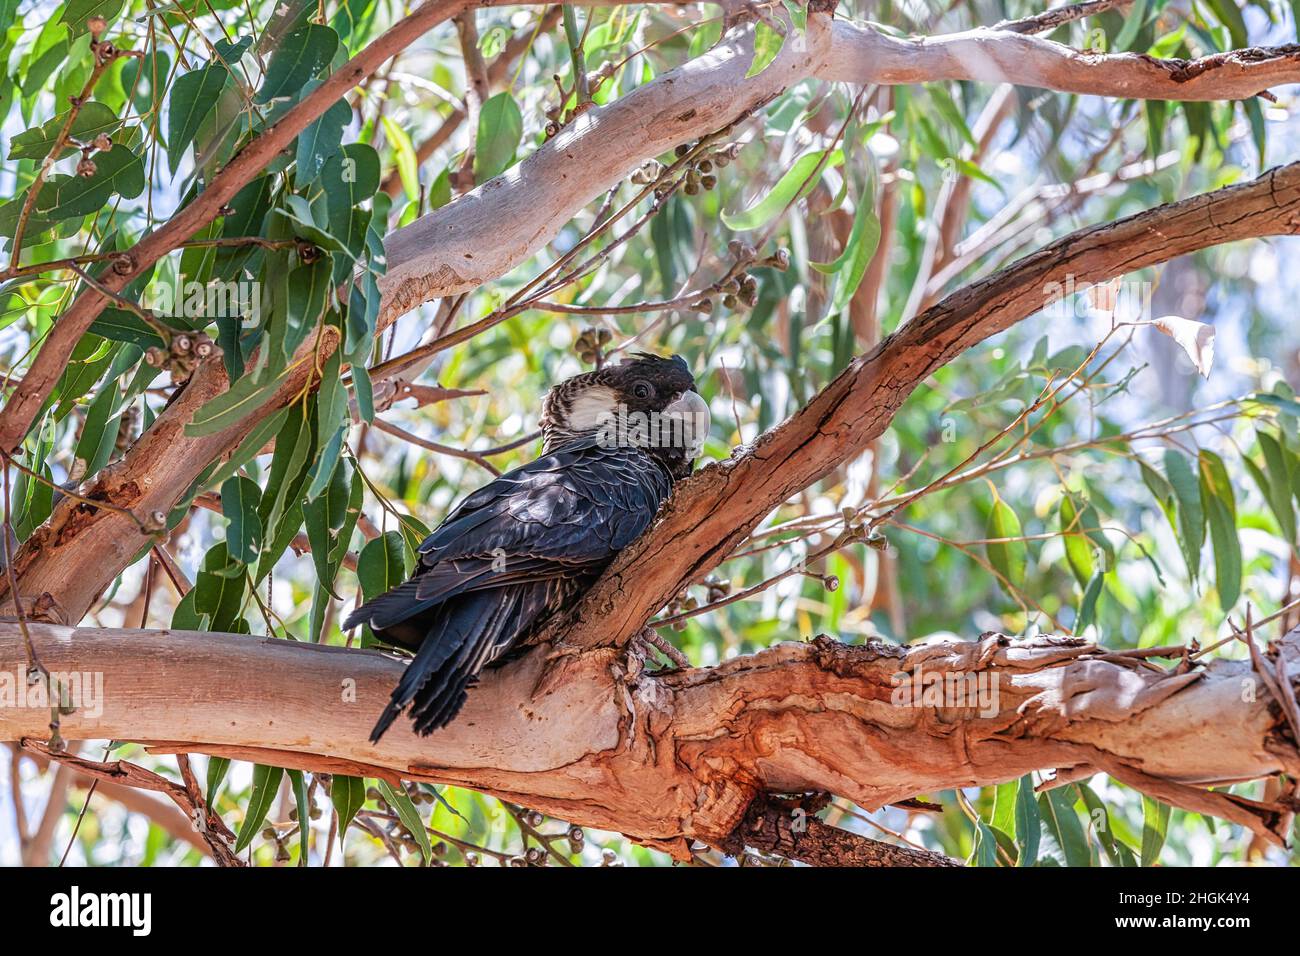 Close up Baudin's Black Cockatoo or Black Long-billed Cockatoo, Calyptorhynchus baudinii, on a thick brown scaly branch of an Eucalyptus tree in natur Stock Photo